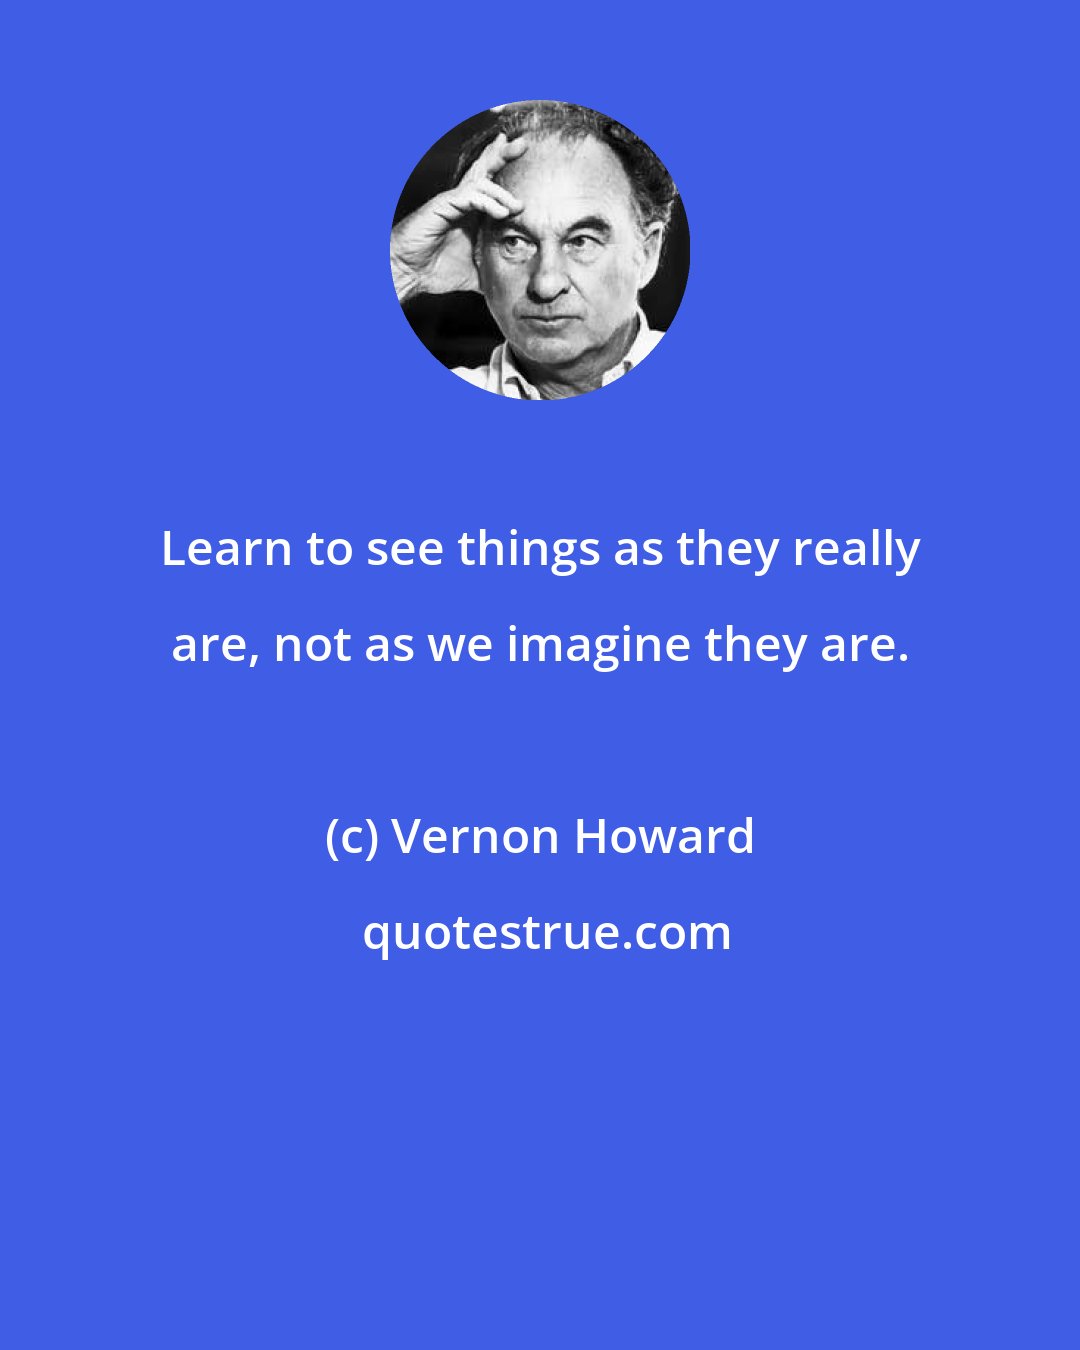 Vernon Howard: Learn to see things as they really are, not as we imagine they are.